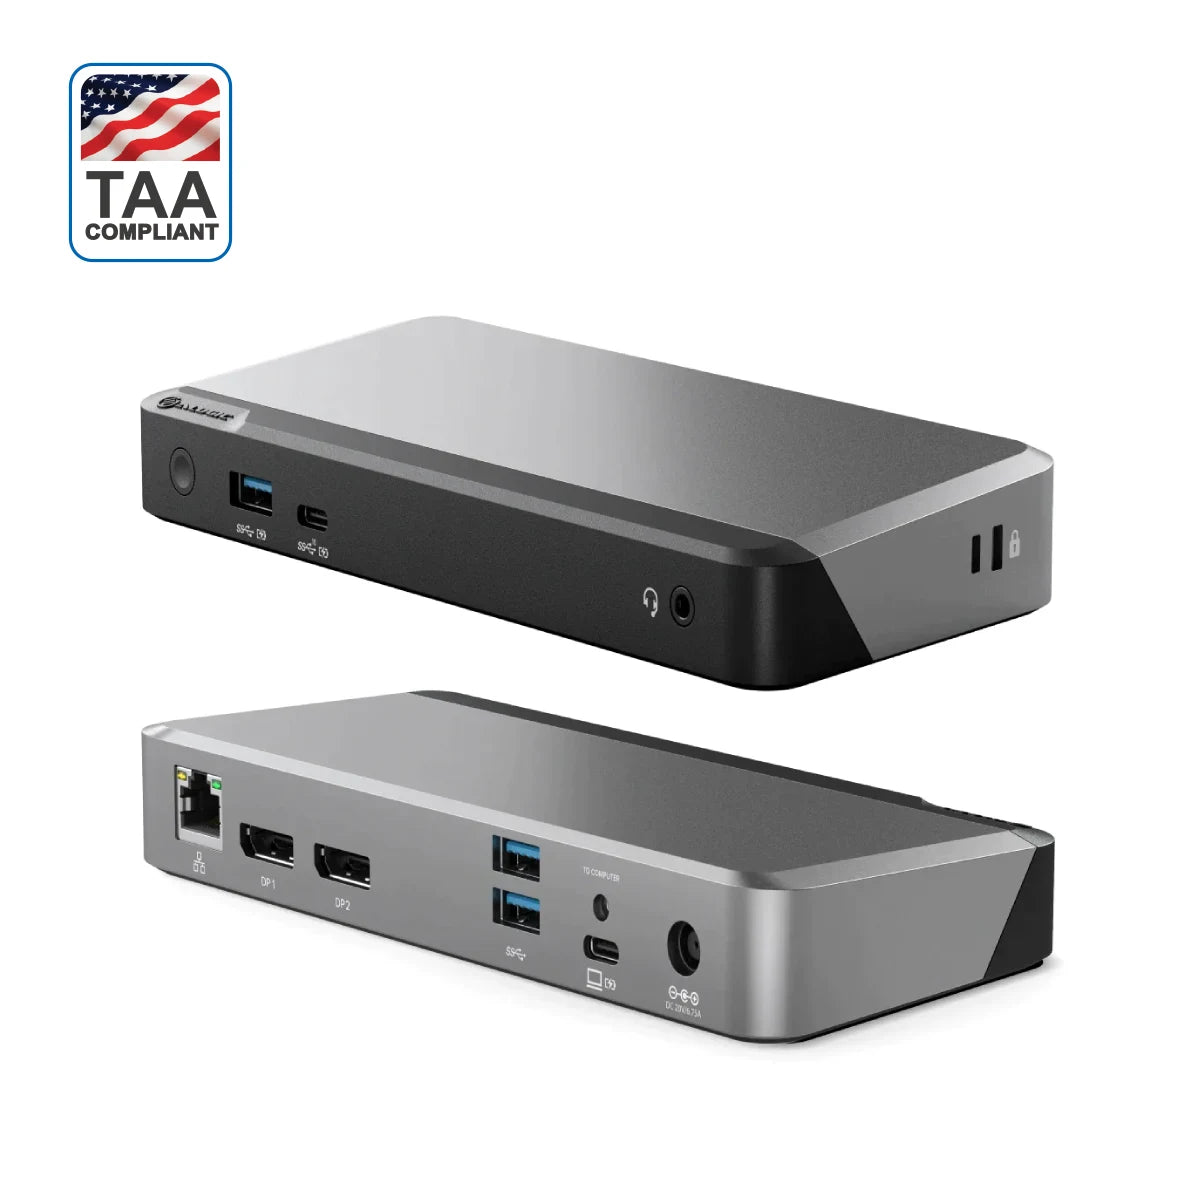 MX2 USB-C Dual Display DP Alt. Mode Docking Station - With 100W Power Delivery